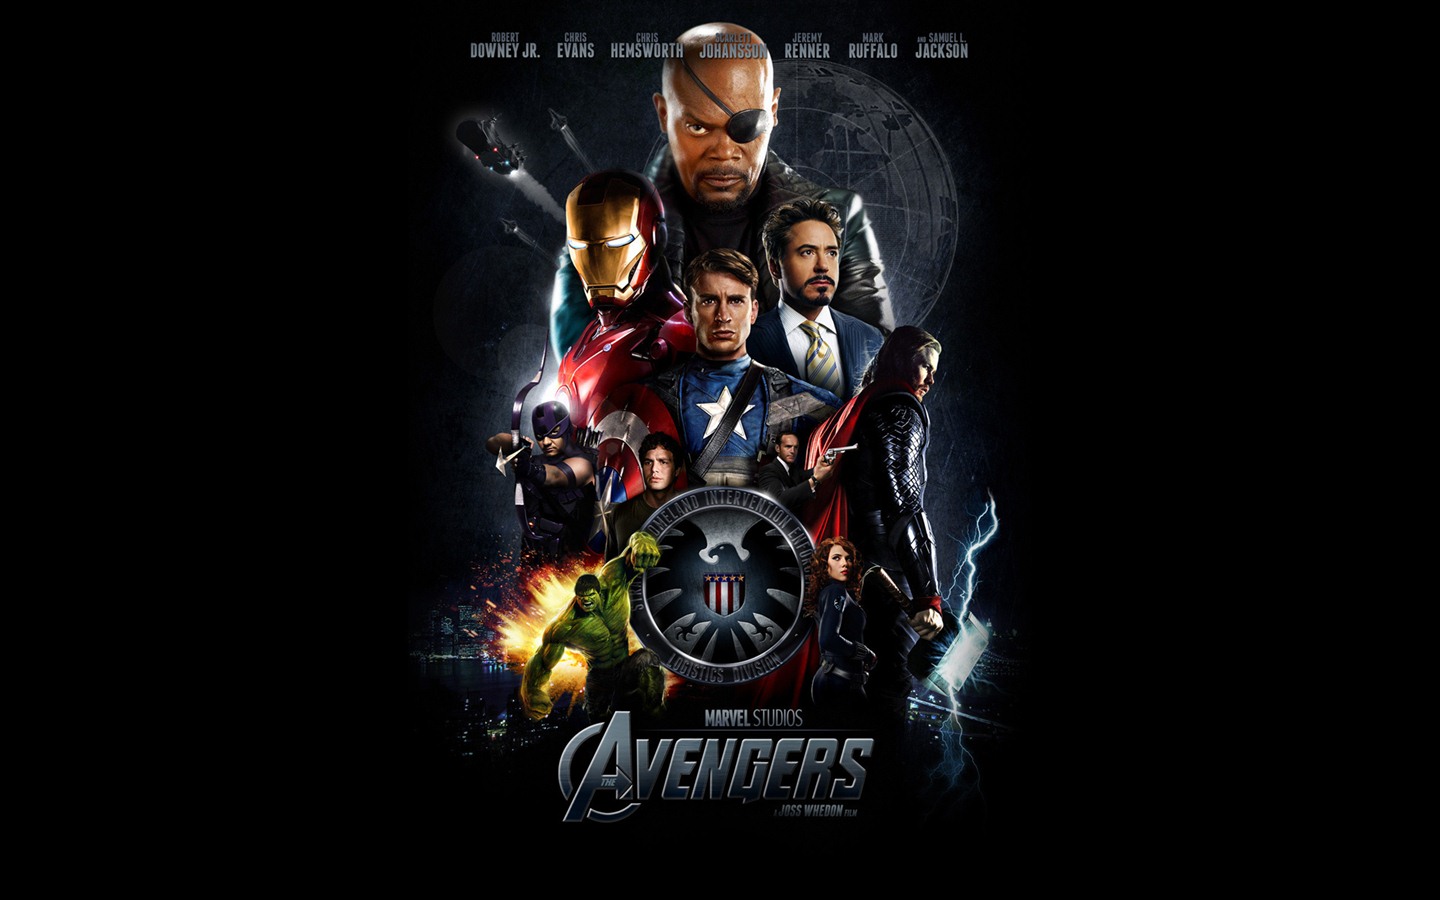 The Avengers 2012 HD wallpapers #16 - 1440x900